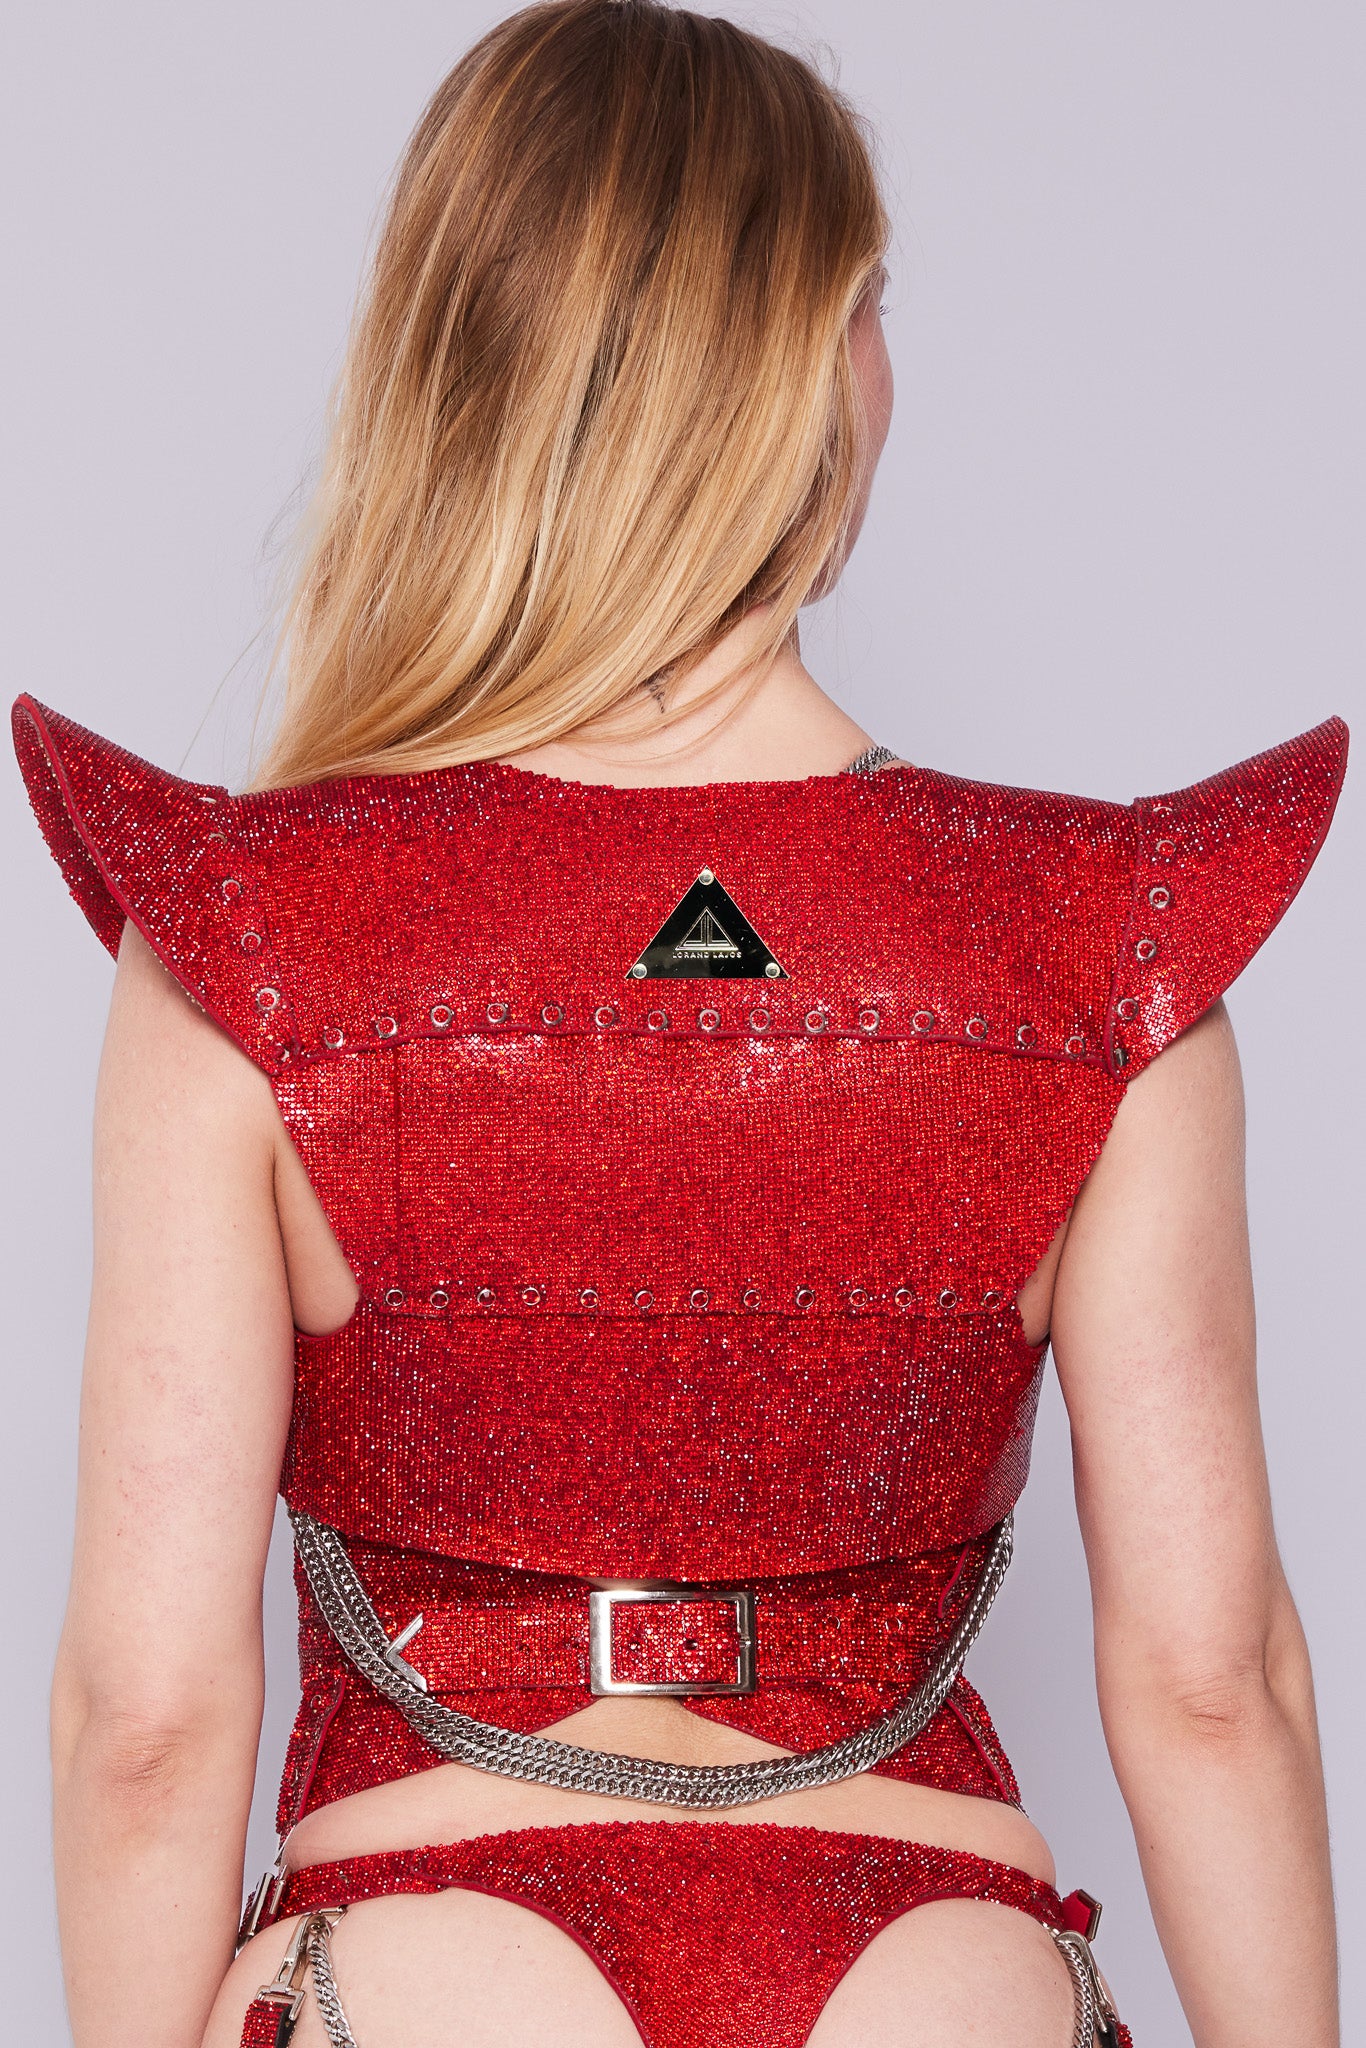 Statement cropped jacket crafted from luxurious red crystal material, ideal for making a bold fashion statement